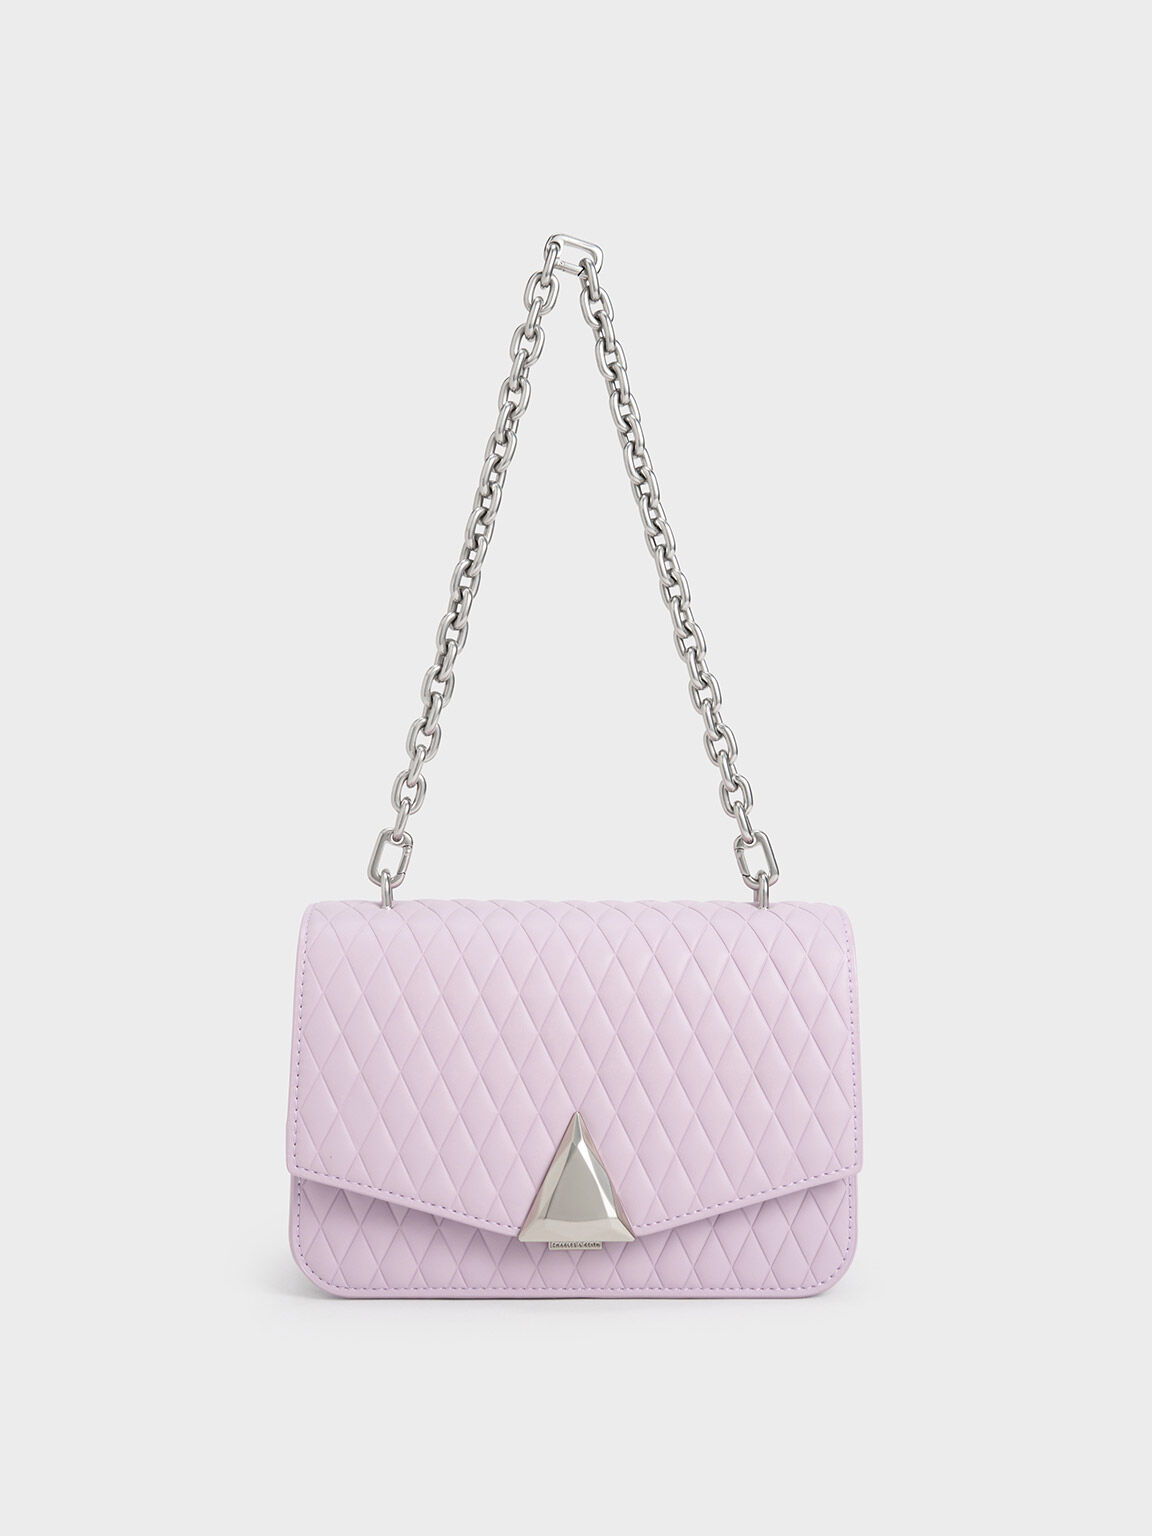 Pink Metallic Quilted Purse